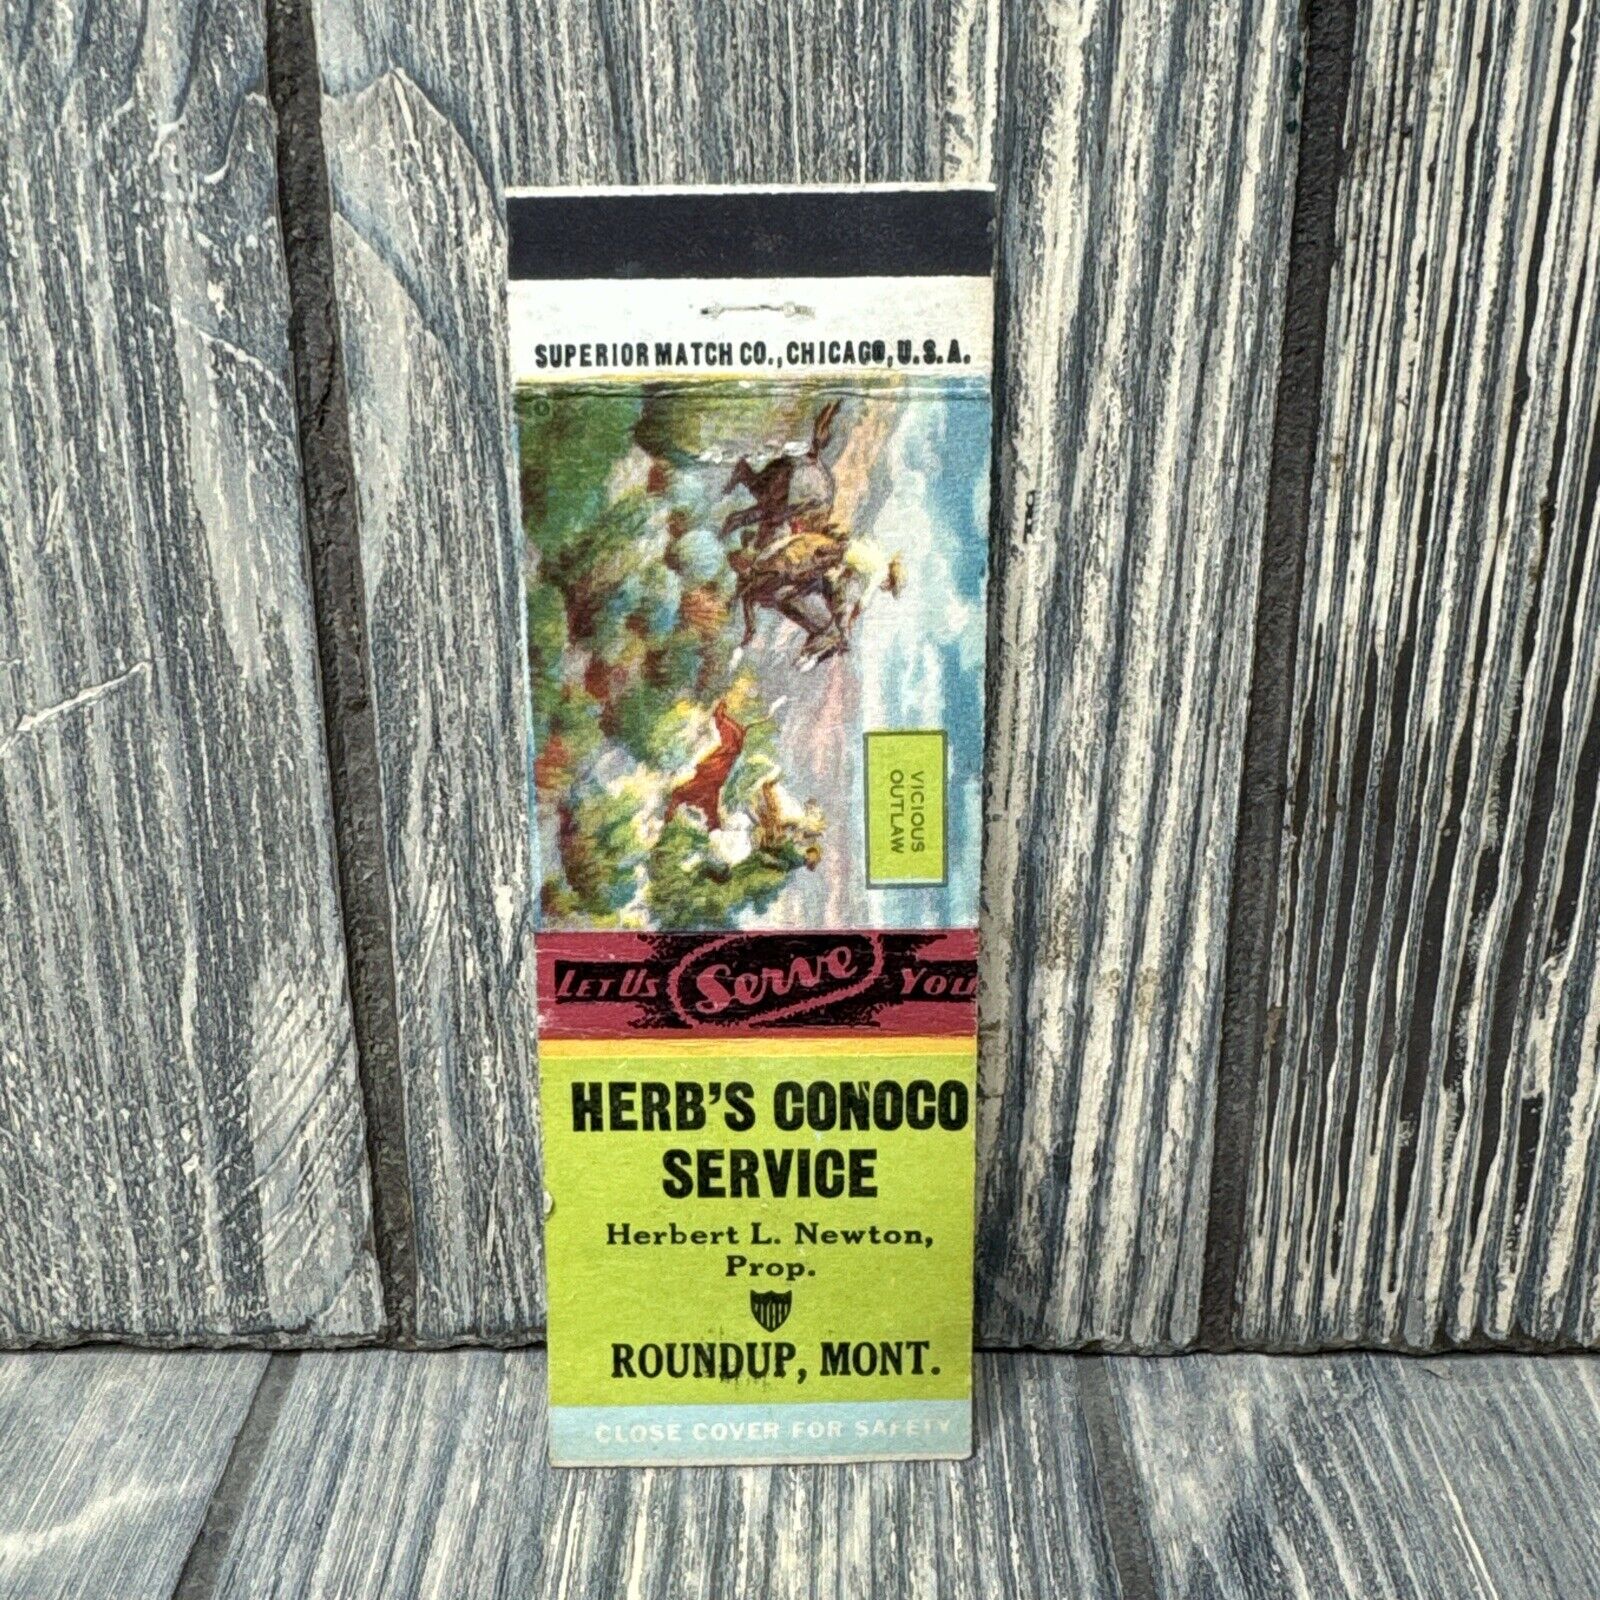 Vtg Herb's Conoco Service Roundup MO Matchbook Cover Advertisement